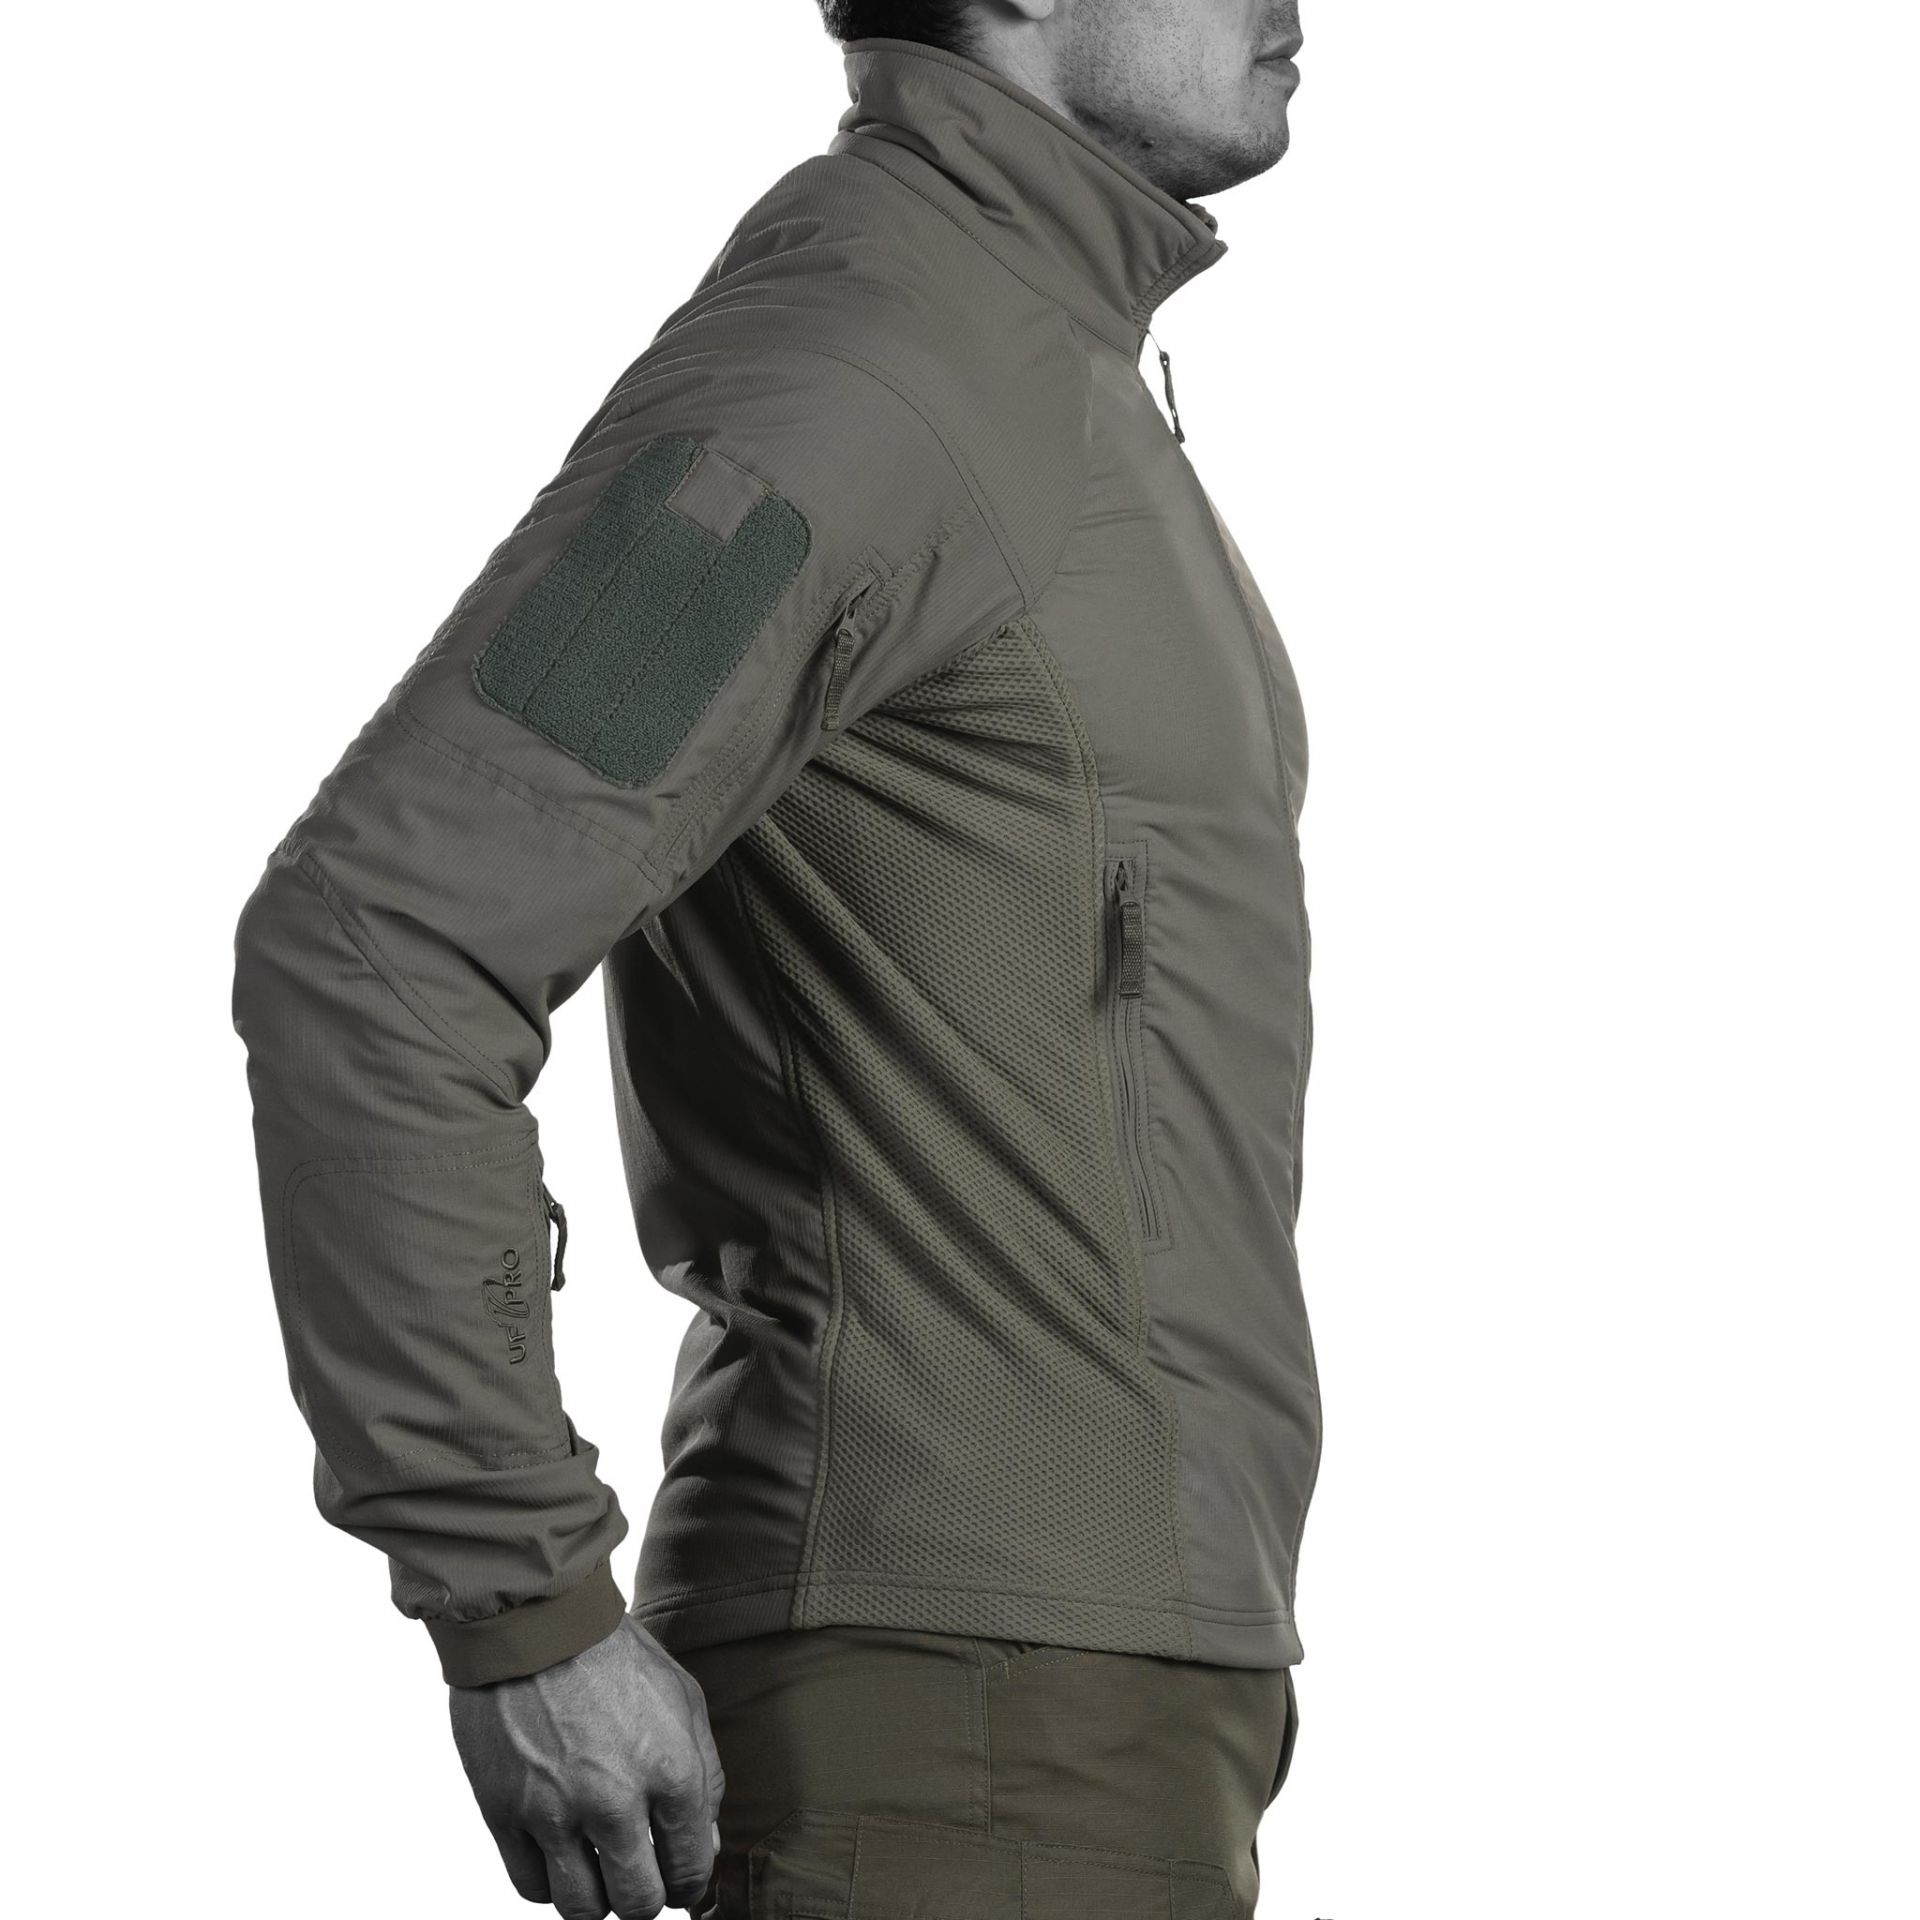 Dutch Army Softshell Jacket Windproof Water Resistant Midlayer 